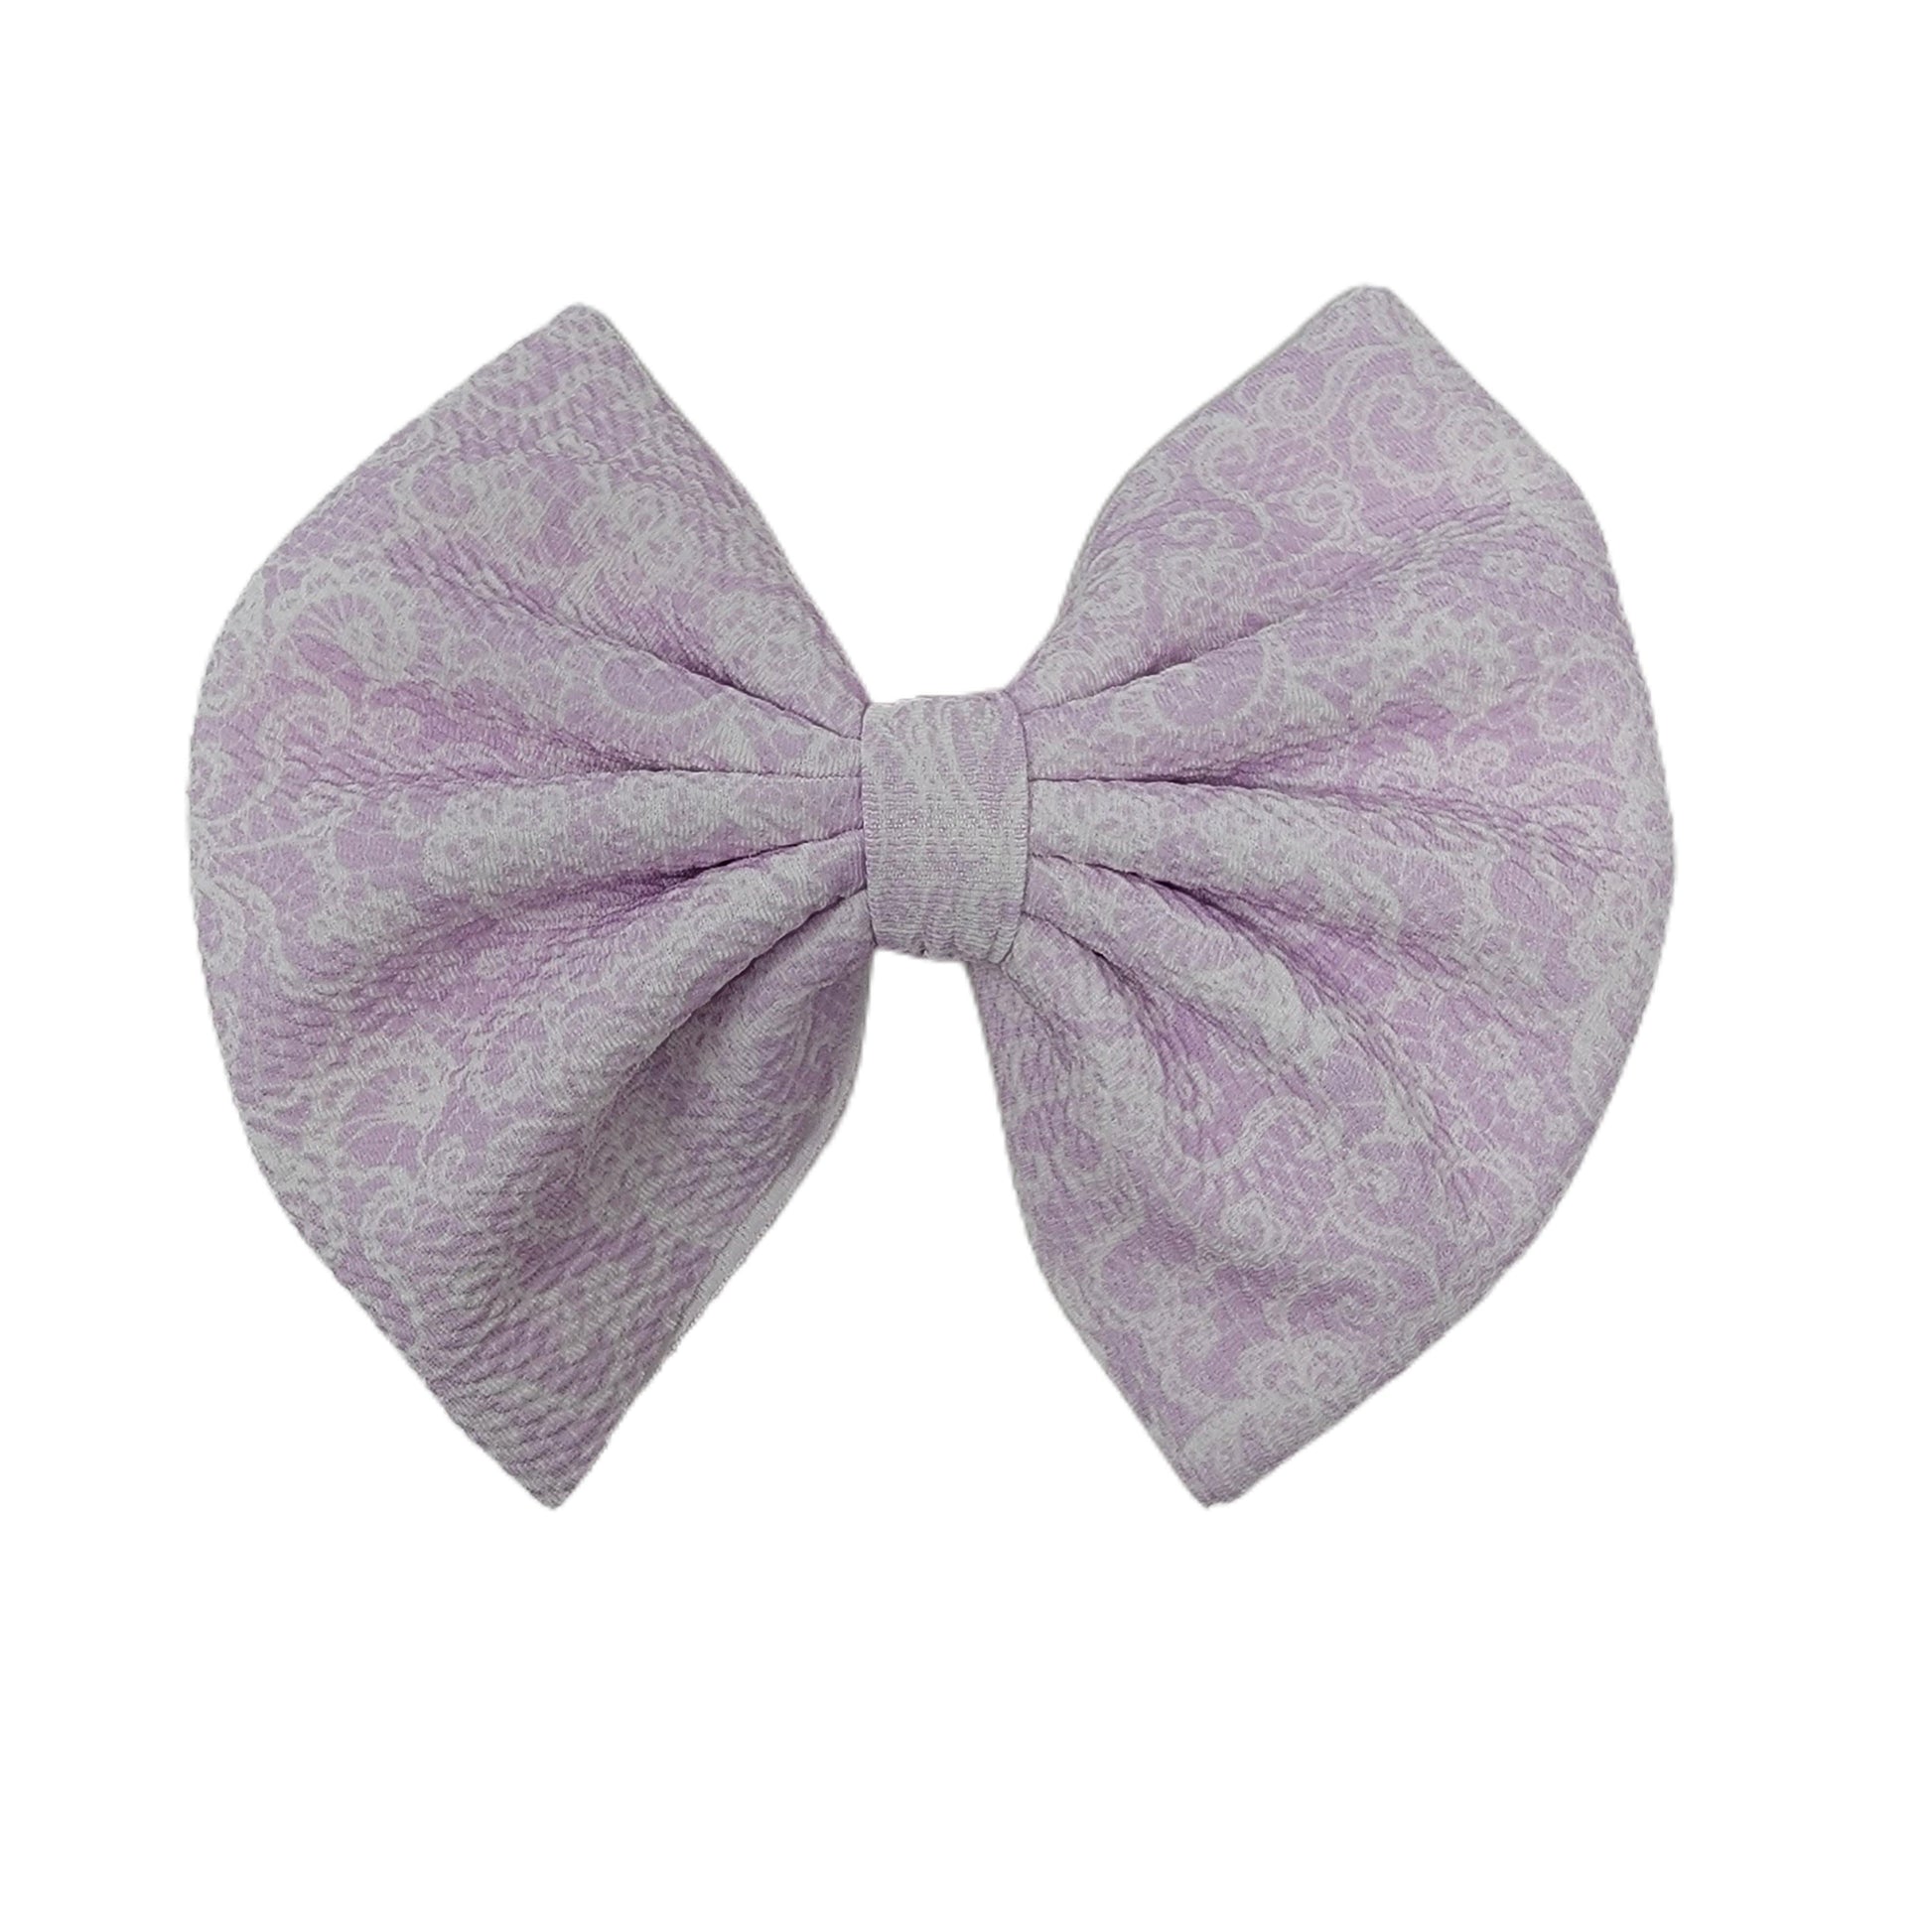 7" Lavender Lace Fabric Bow